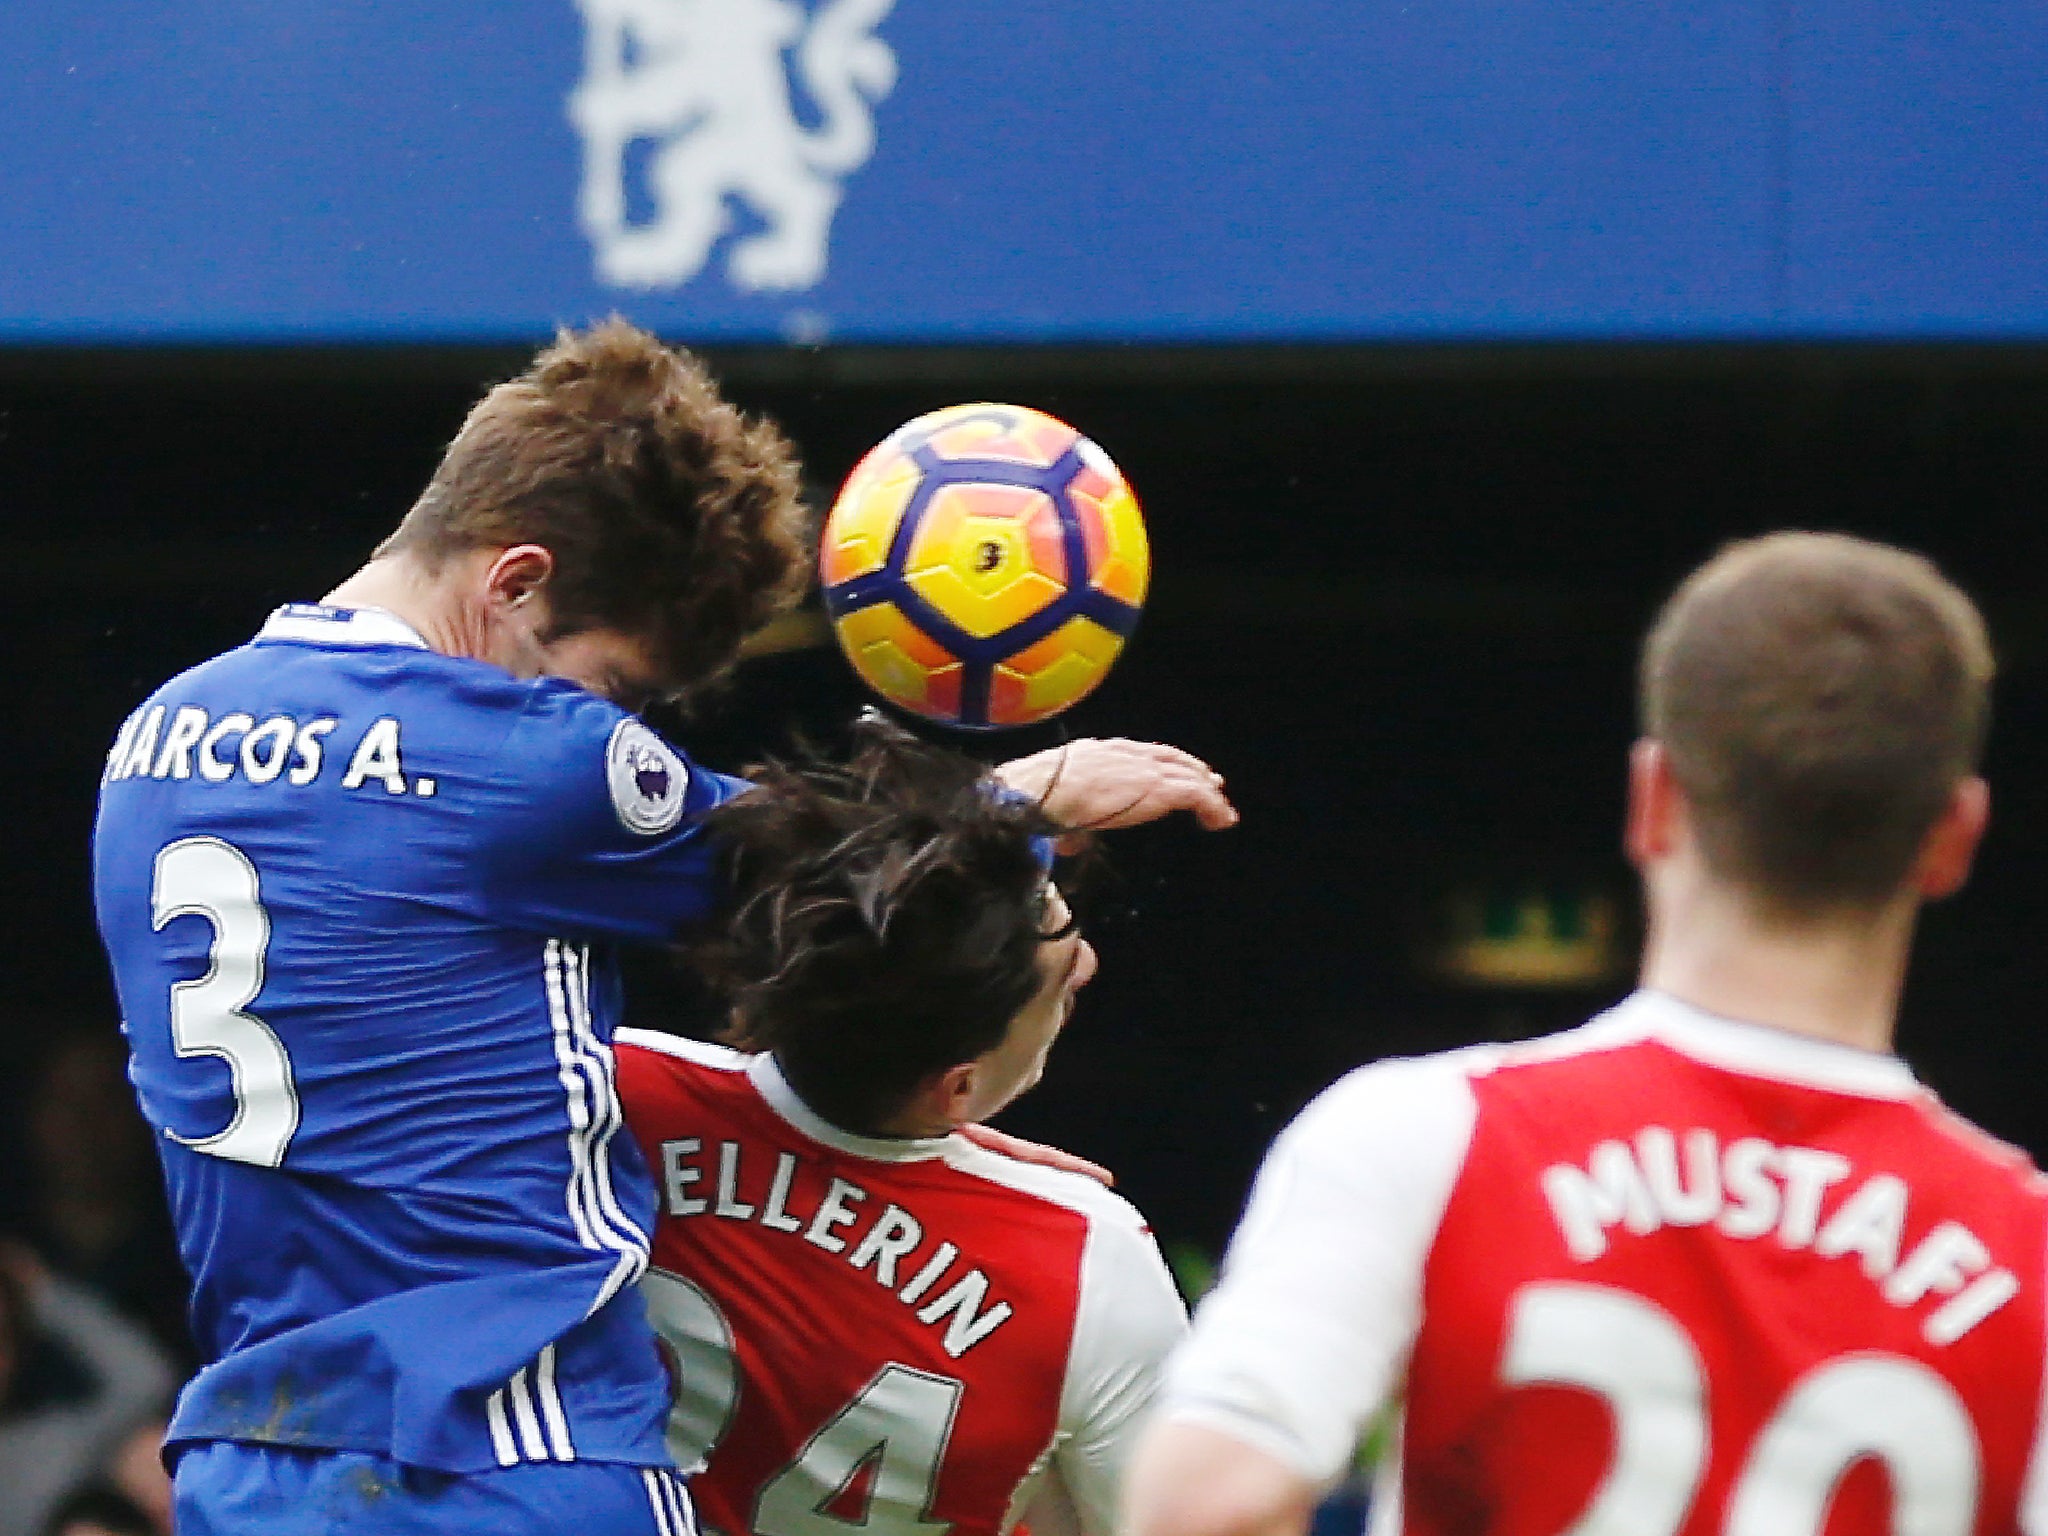 Marcos Alonso rises above Hector Bellerin to score the opening goal - but was it legal?